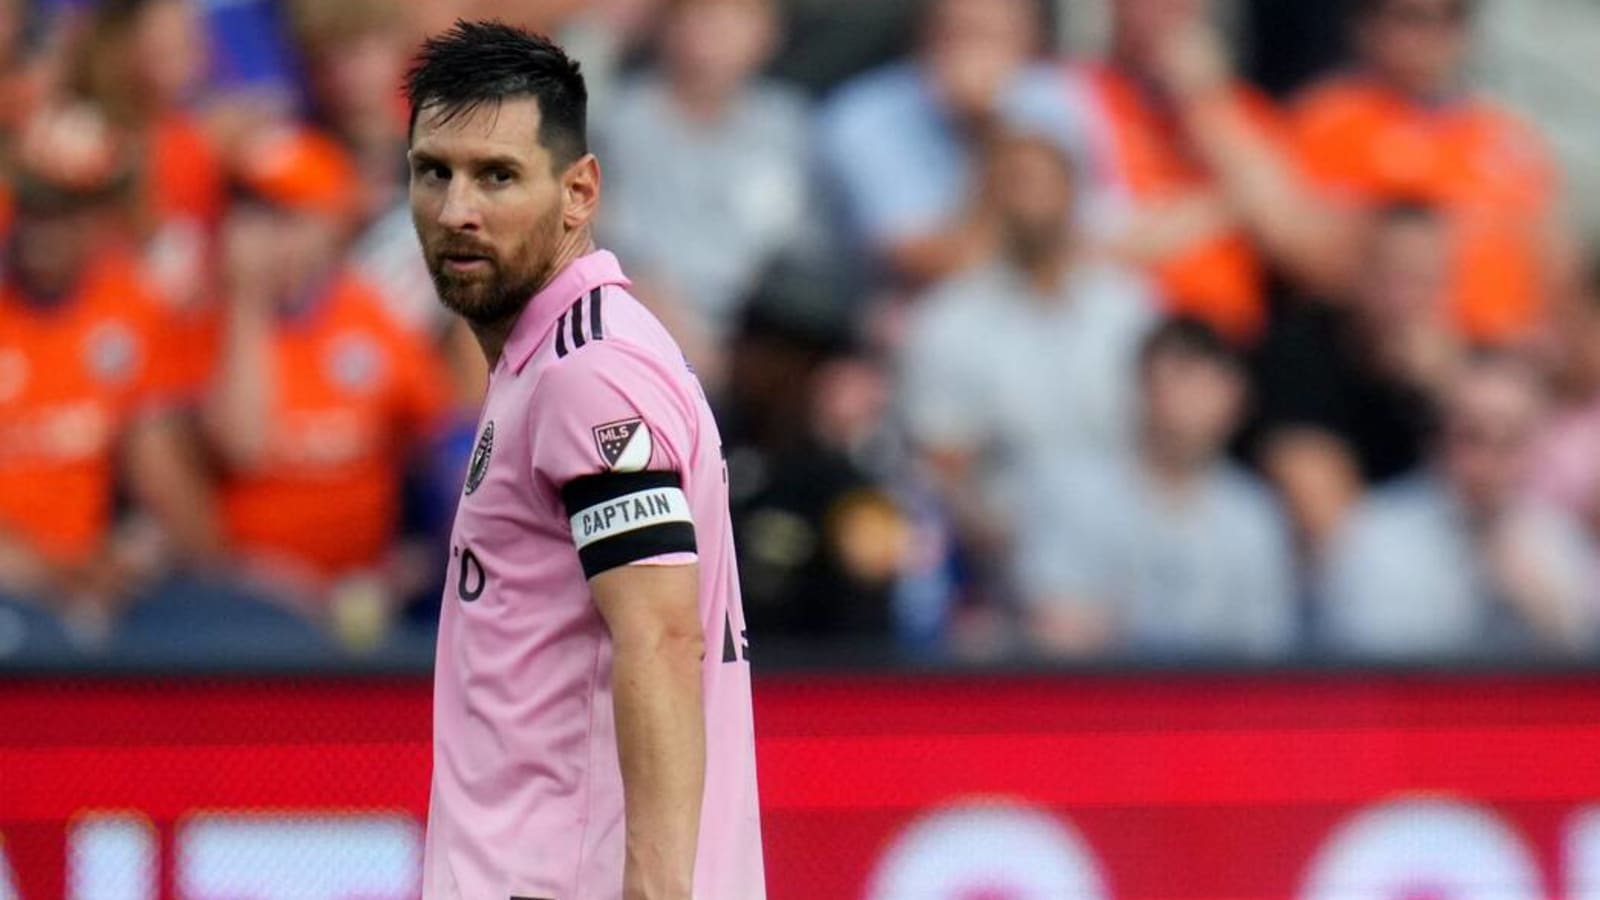 Lionel Messi: World’s Best Player with an Astonishing Net Worth